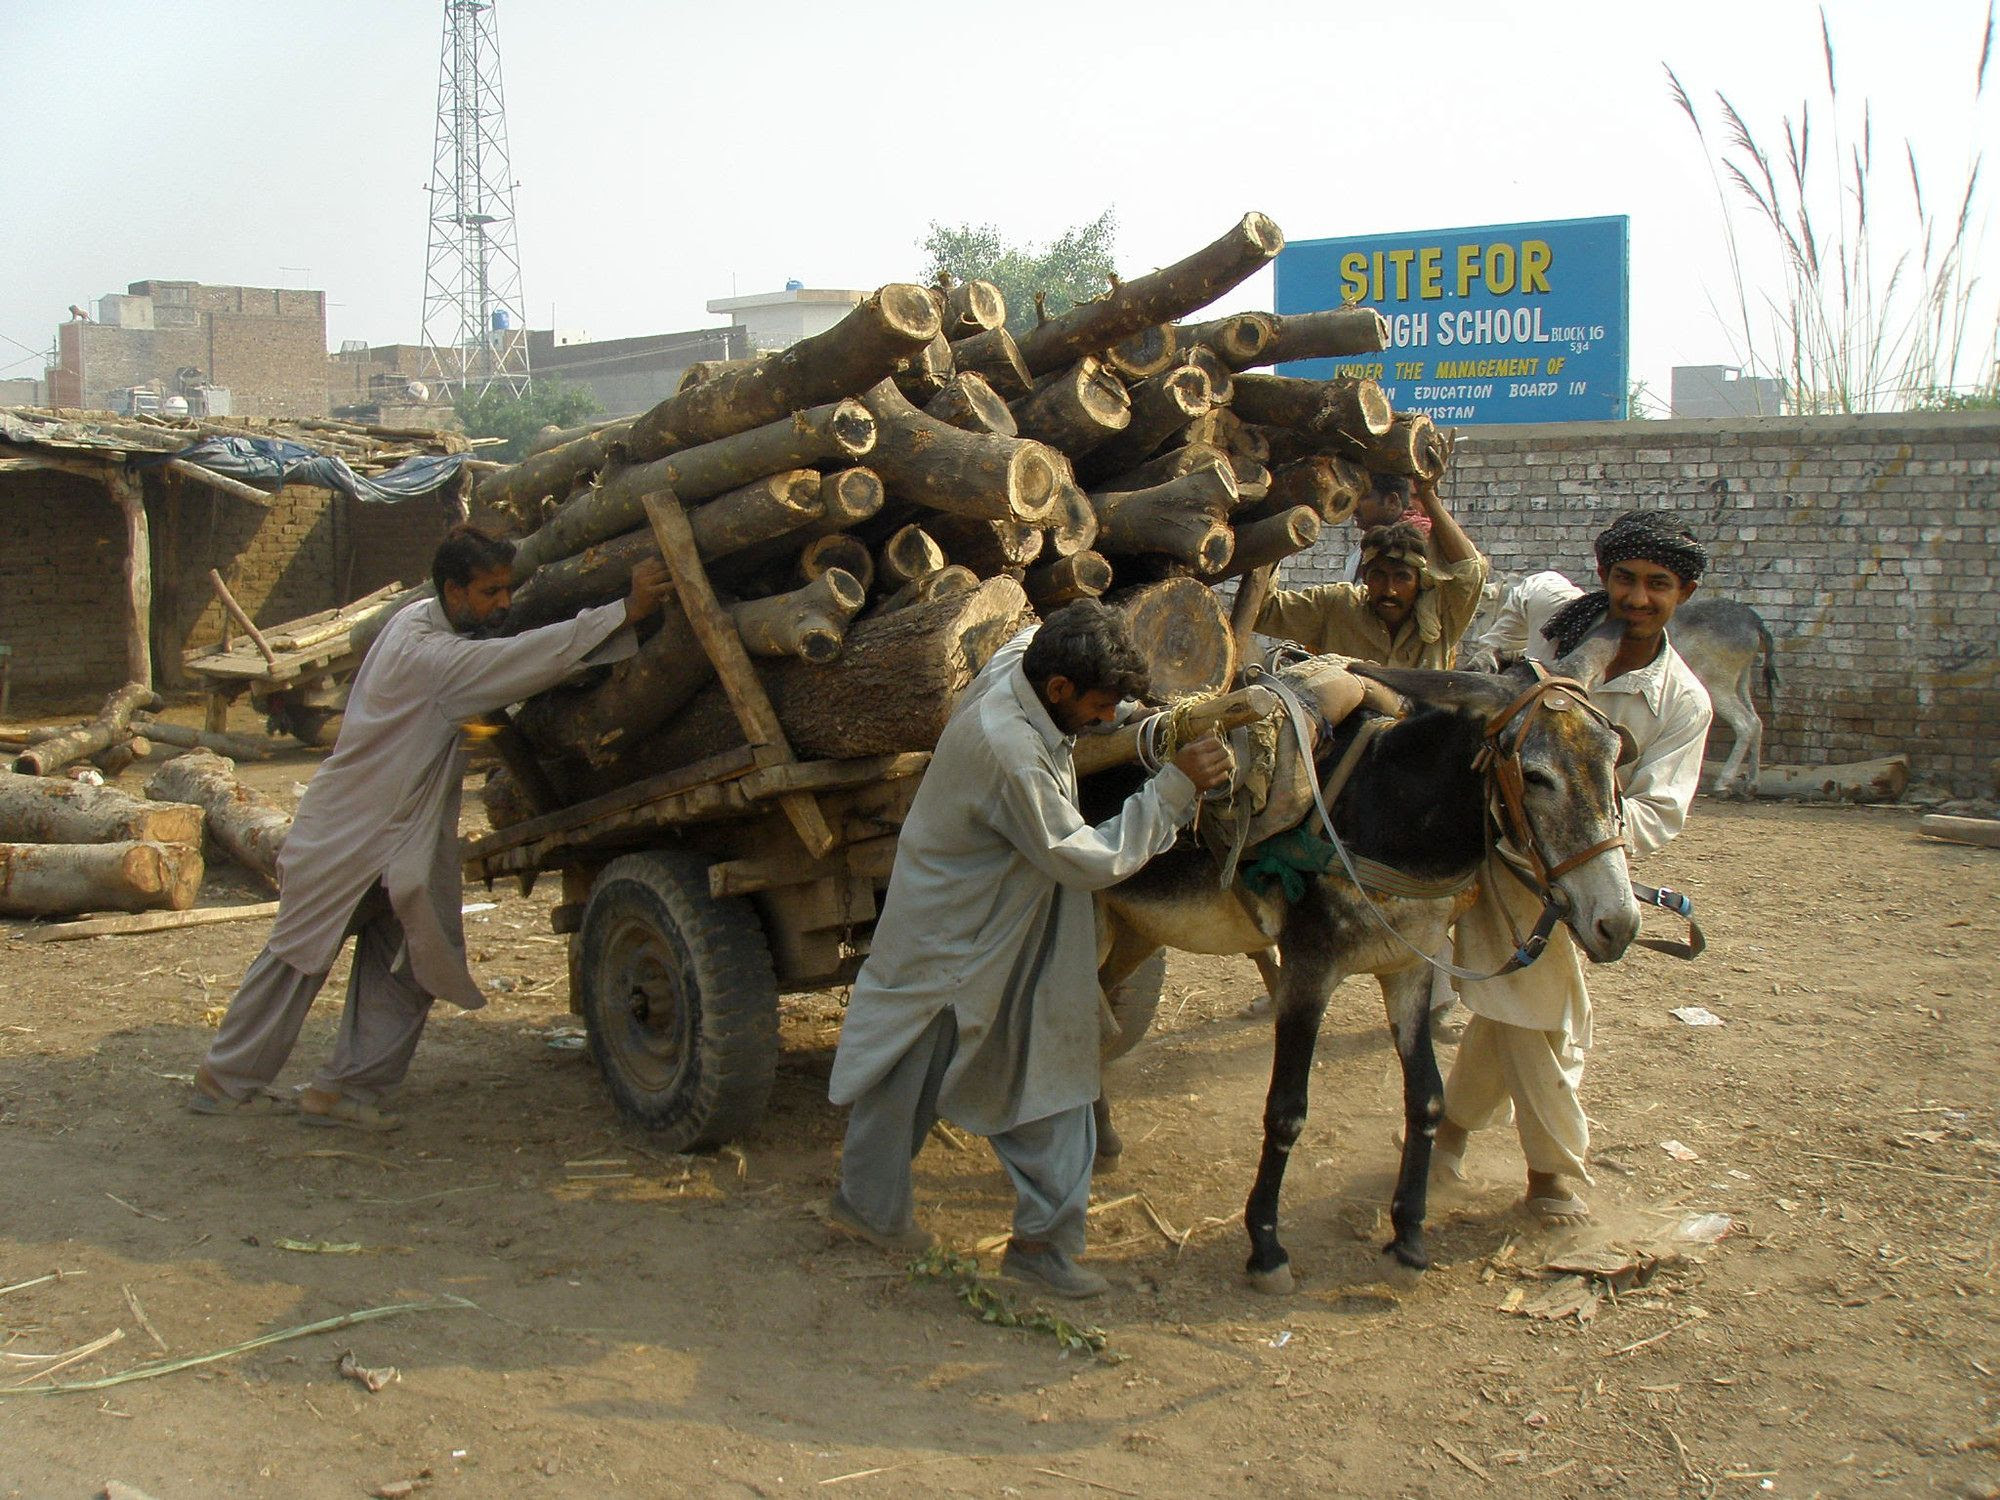 Equines haul most of the building materials in the developing world, like this donkey who is hauling timber in Pakistan.  www.BrookeUSA.org